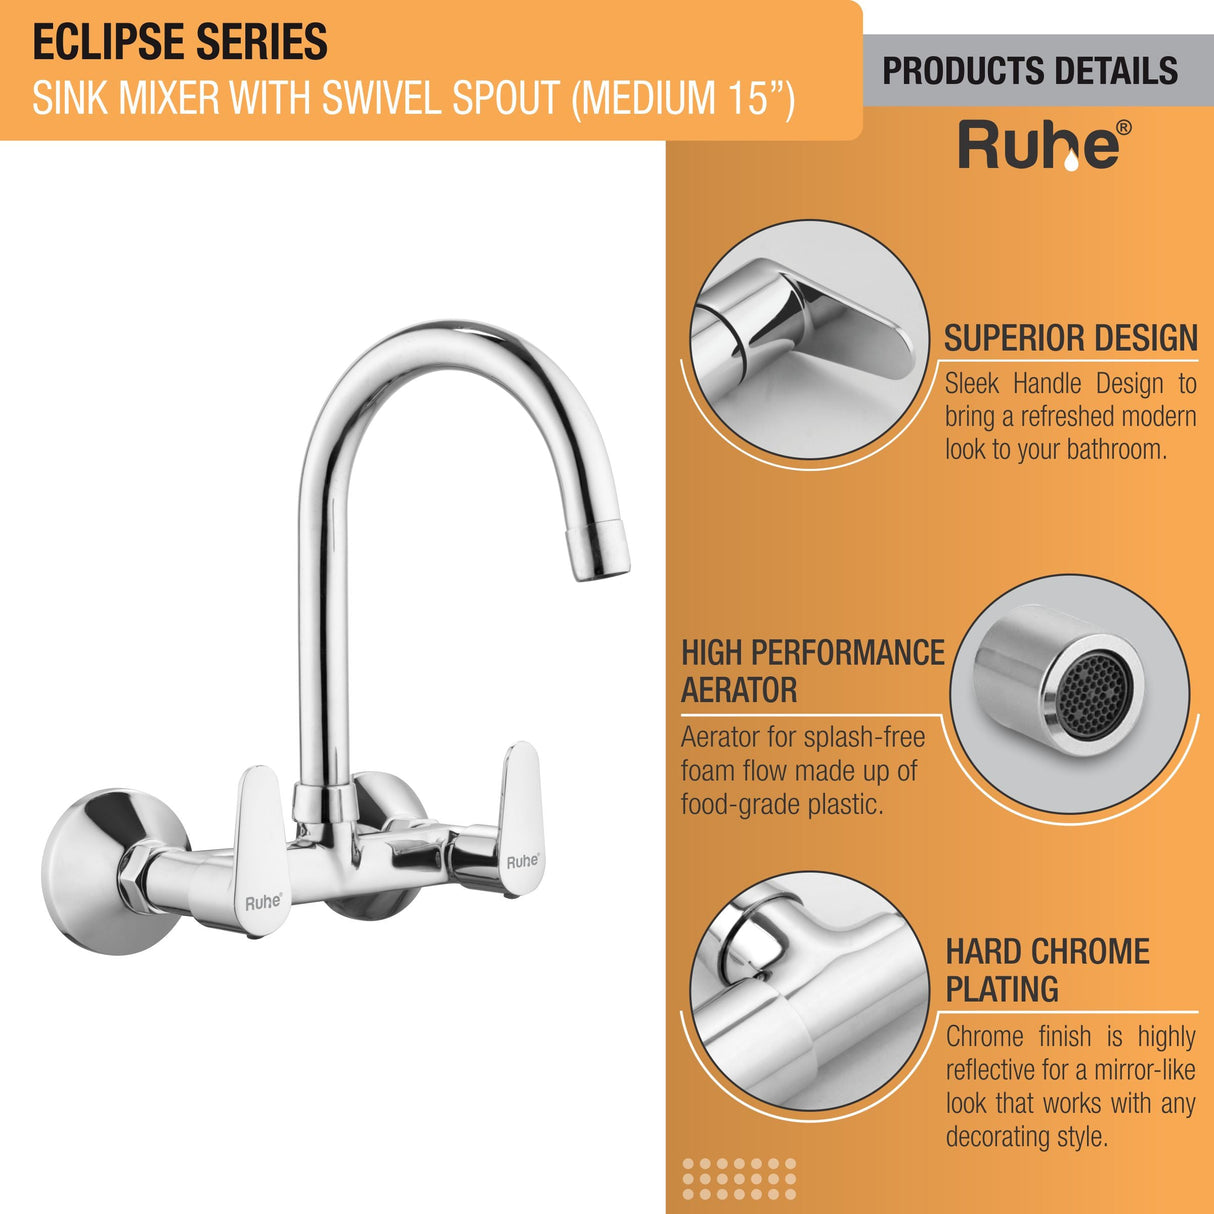 Eclipse Sink Mixer with Medium (15 inches) Round Swivel Spout Faucet product details